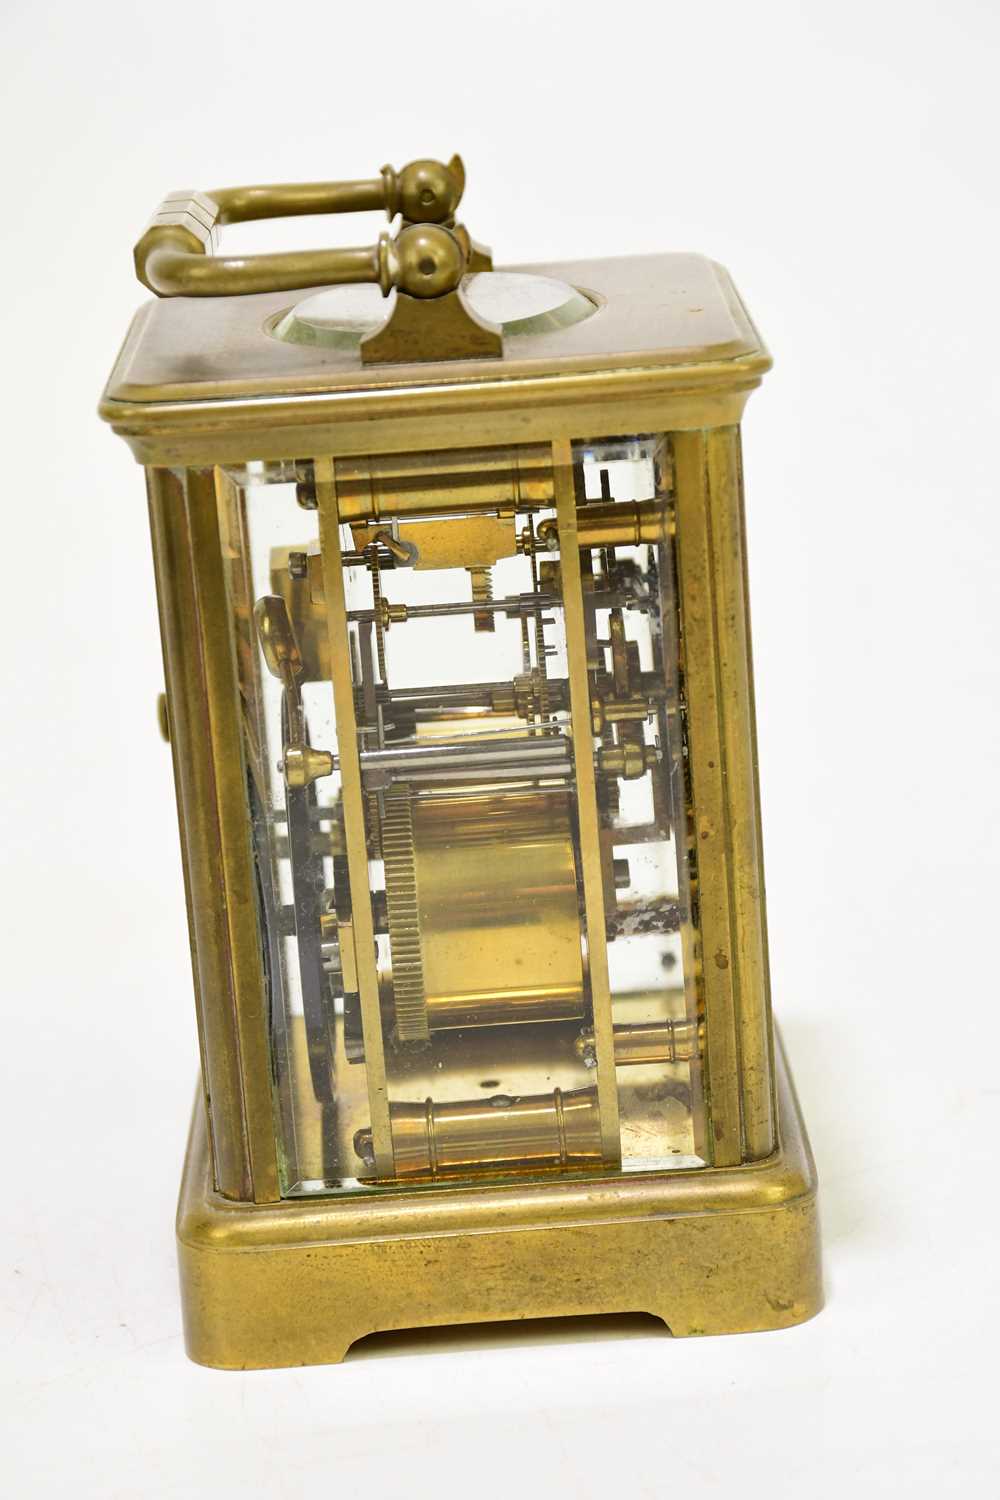 J.W. BENSON, LUDGATE HILL LONDON; a 19th century carriage clock with swing handle, the enamelled - Image 3 of 5